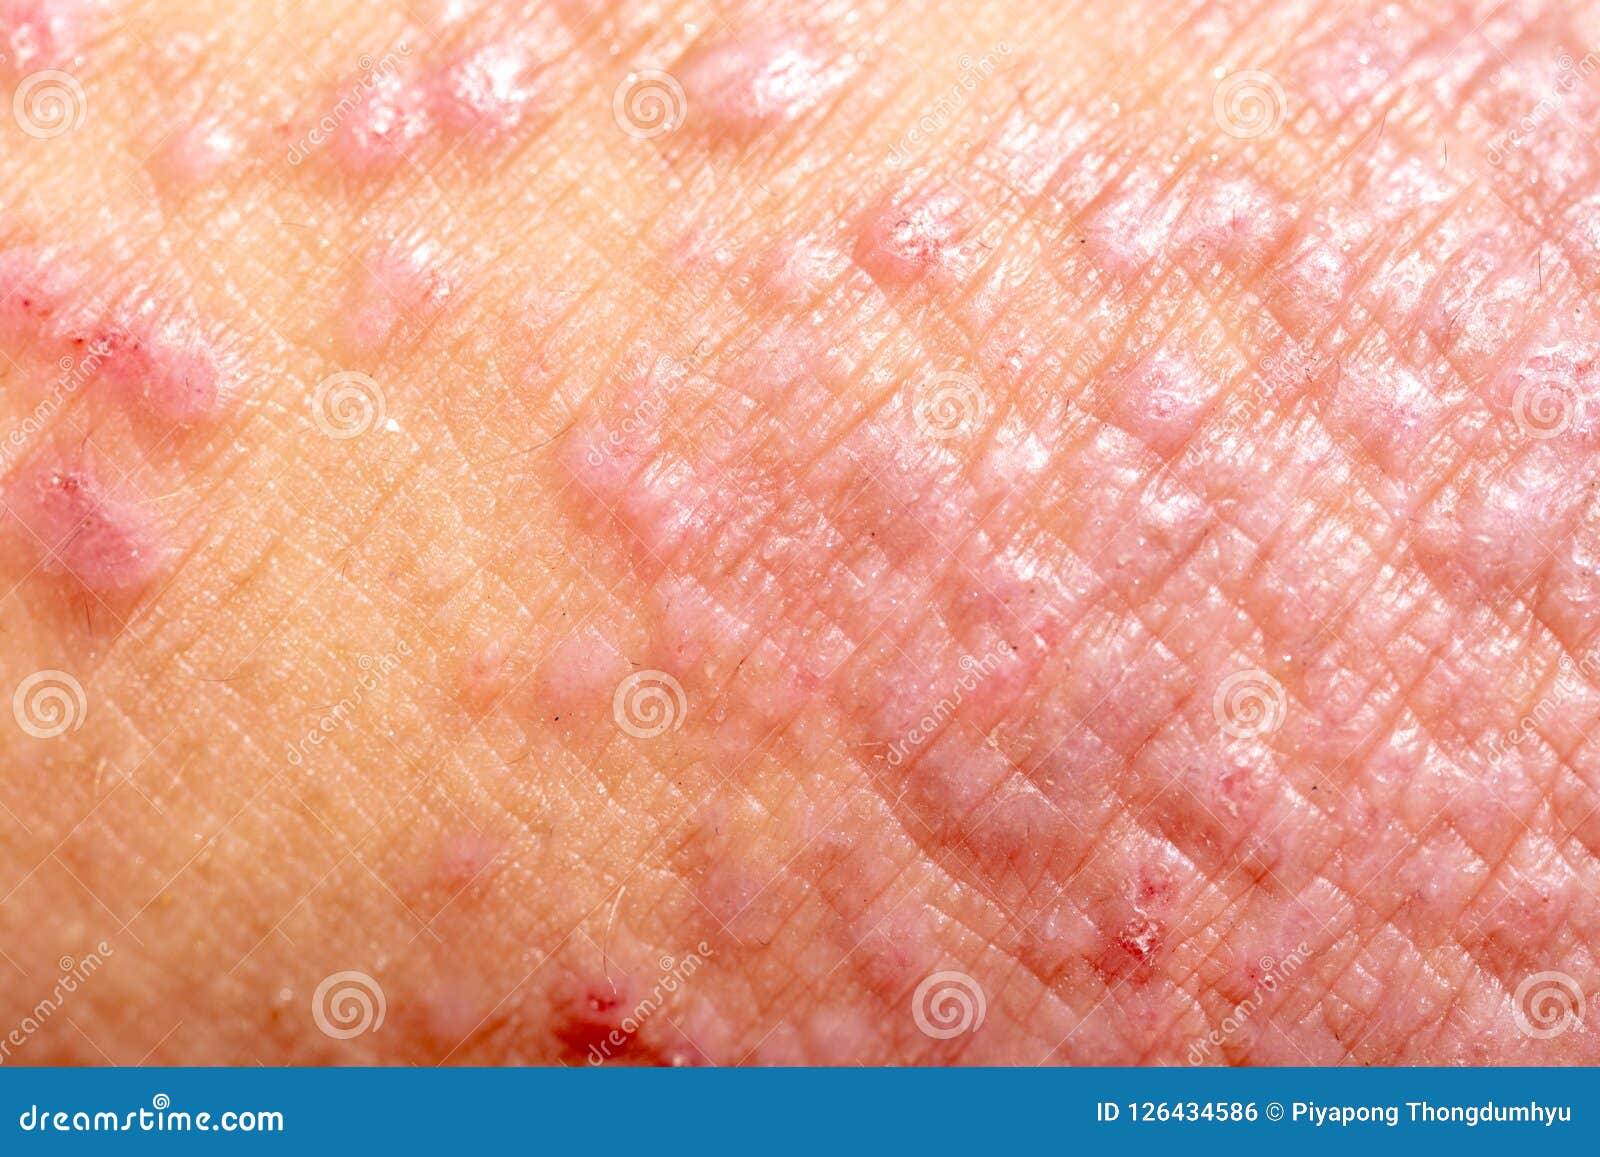 What is eczema?